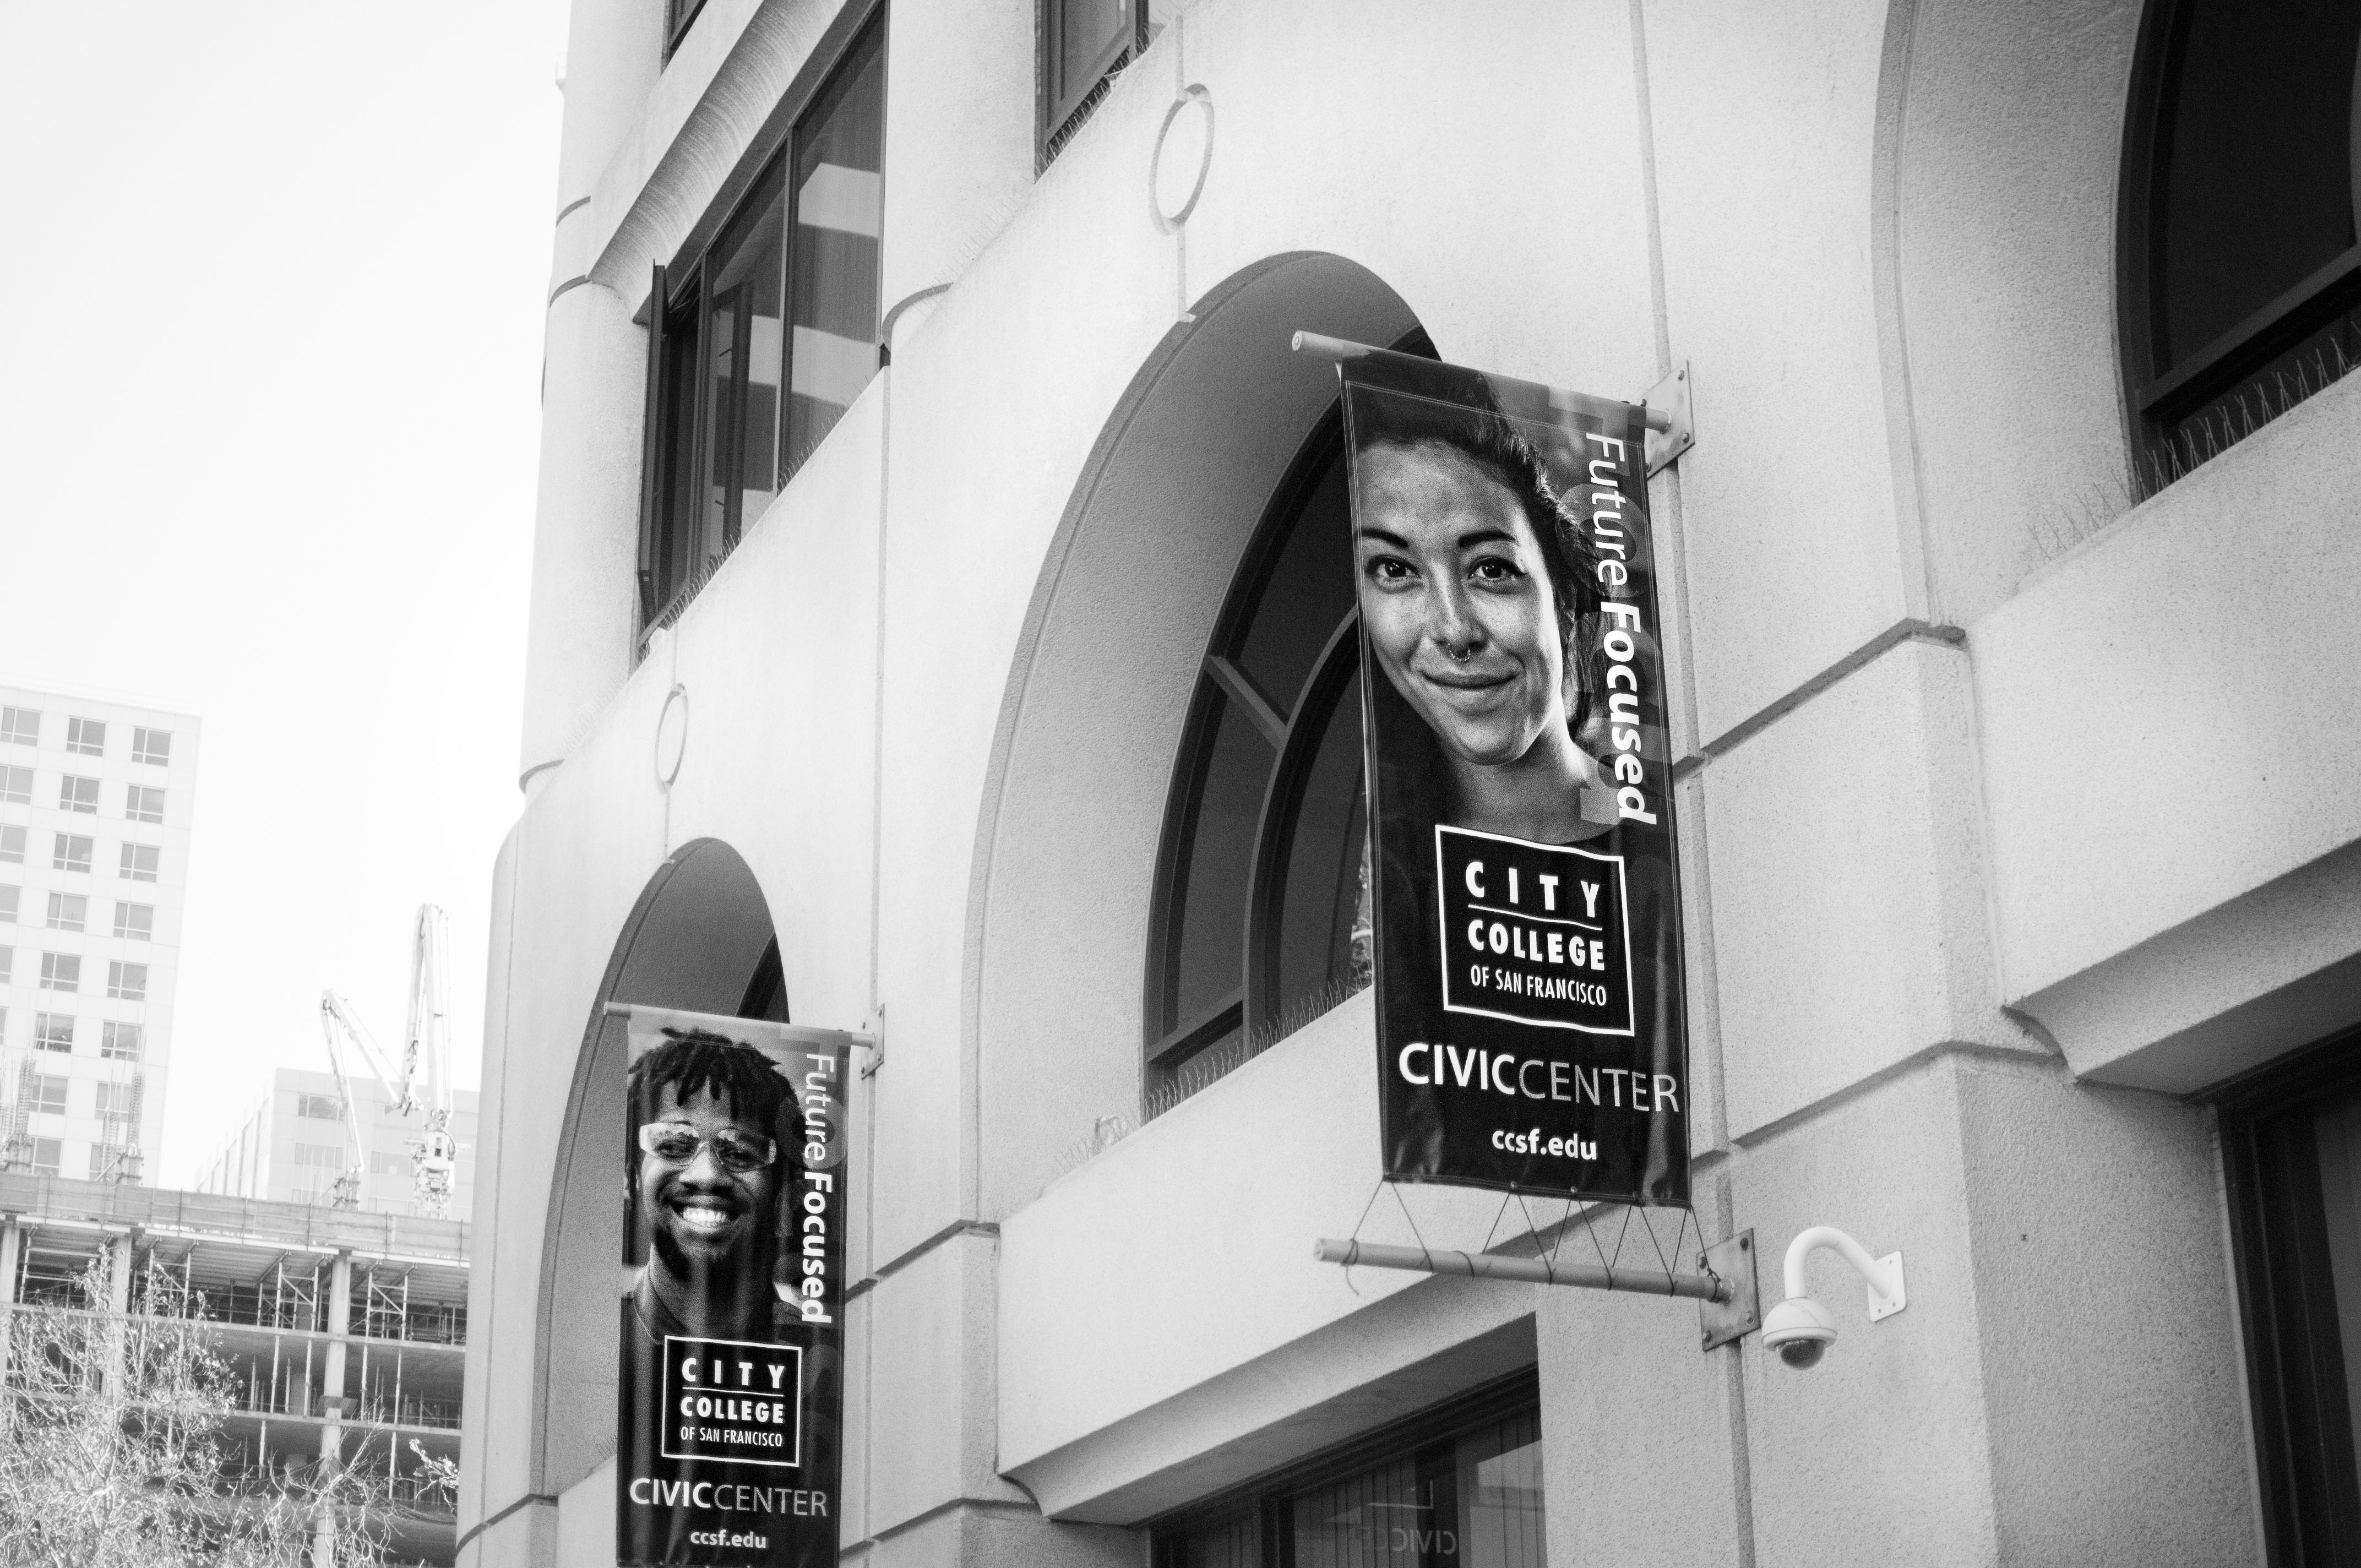 City College of San Francisco banners outside the Market Street building on Friday, Nov. 13, 2015. (Photo by Otto Pippenger/The Guardsman)